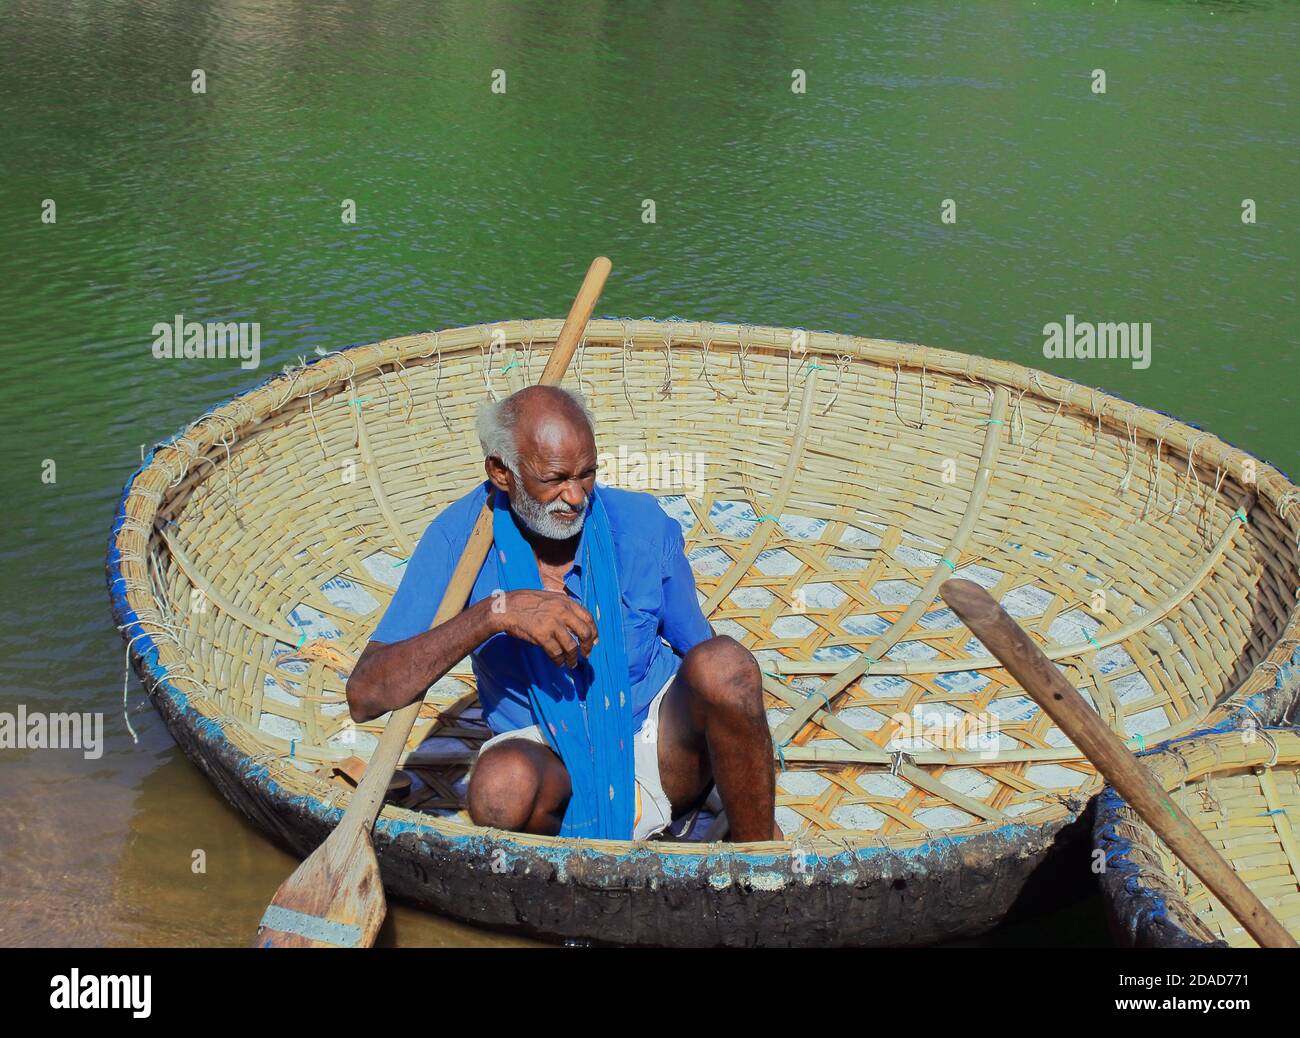 the old boatman sitting on his coracle boat, boating point of hogenakkal in tamil nadu, india Stock Photo